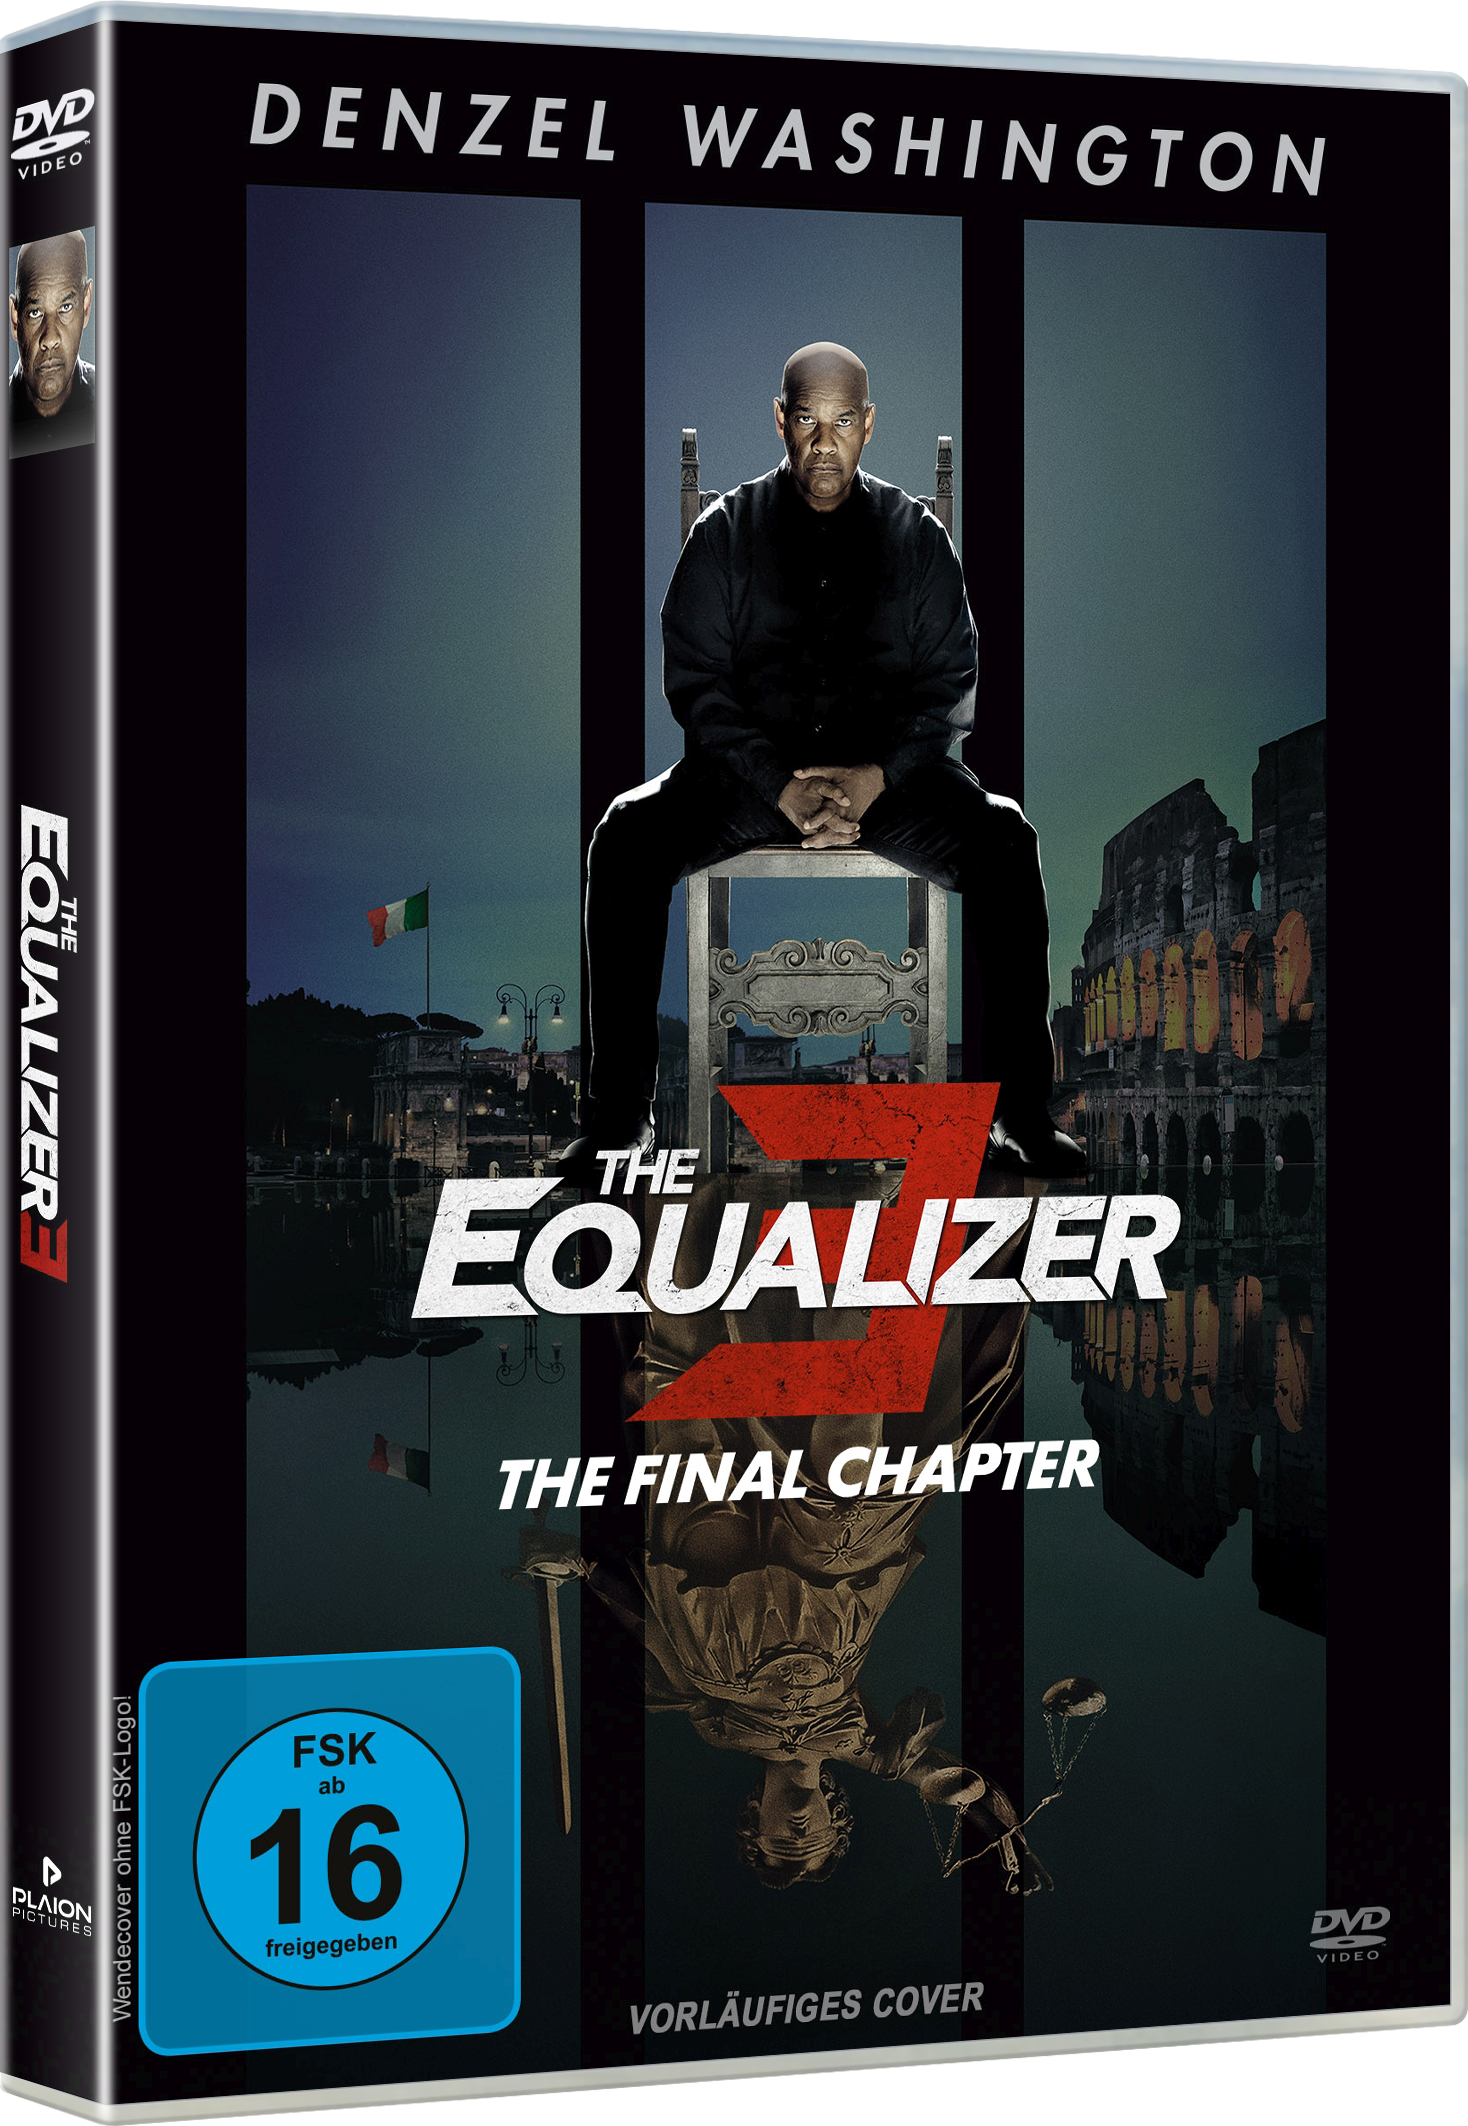 The Equalizer 3 - The Final Chapter (DVD) Image 2